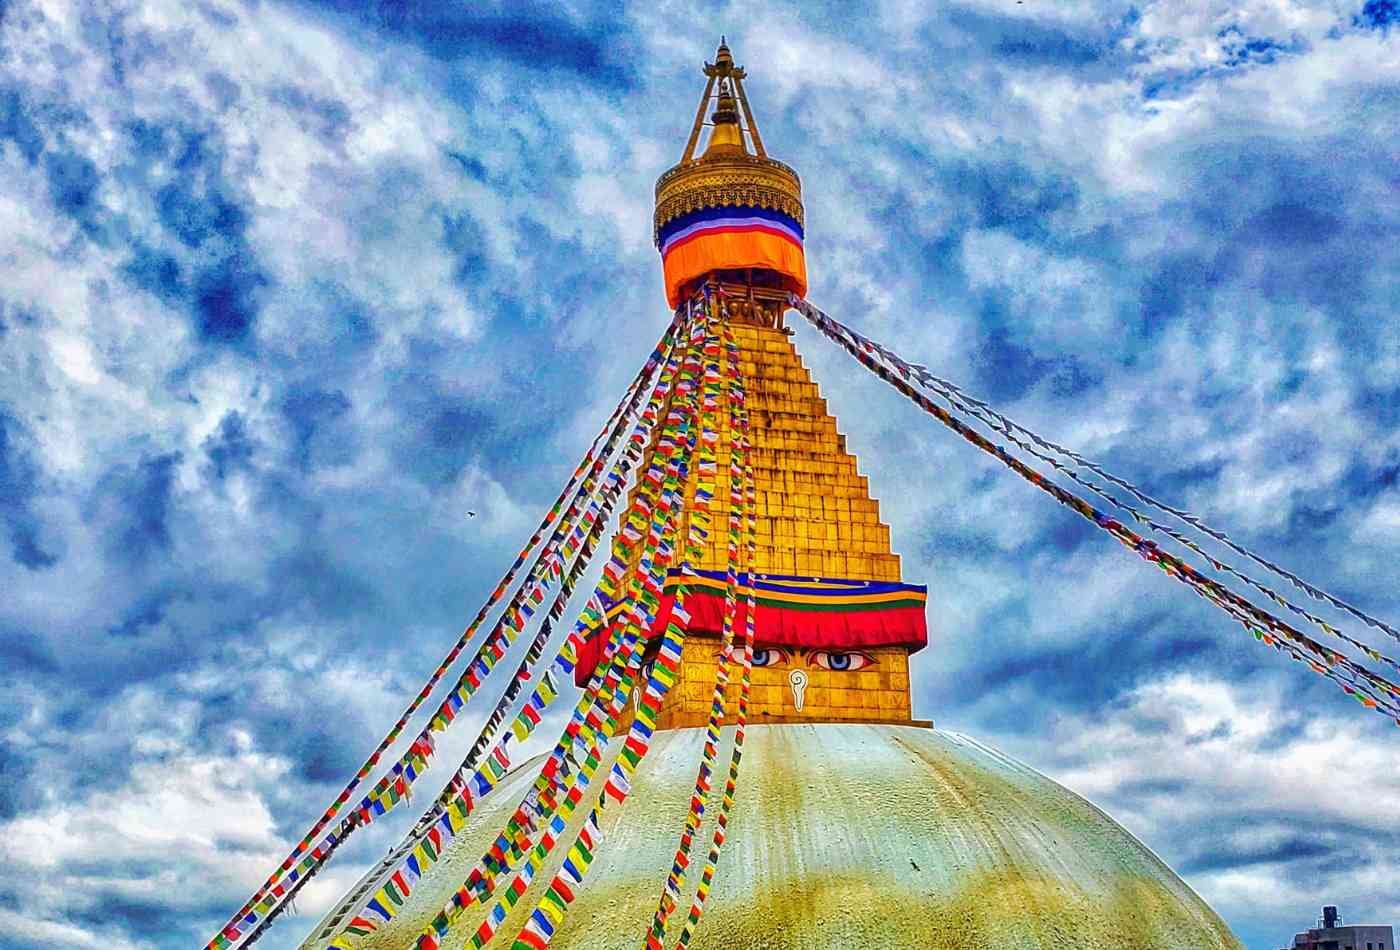 A majestic view of the Bouddhanath Stupa, surrounded by prayer flags fluttering in the wind and the iconic Buddha eyes, gazing down upon the scene.